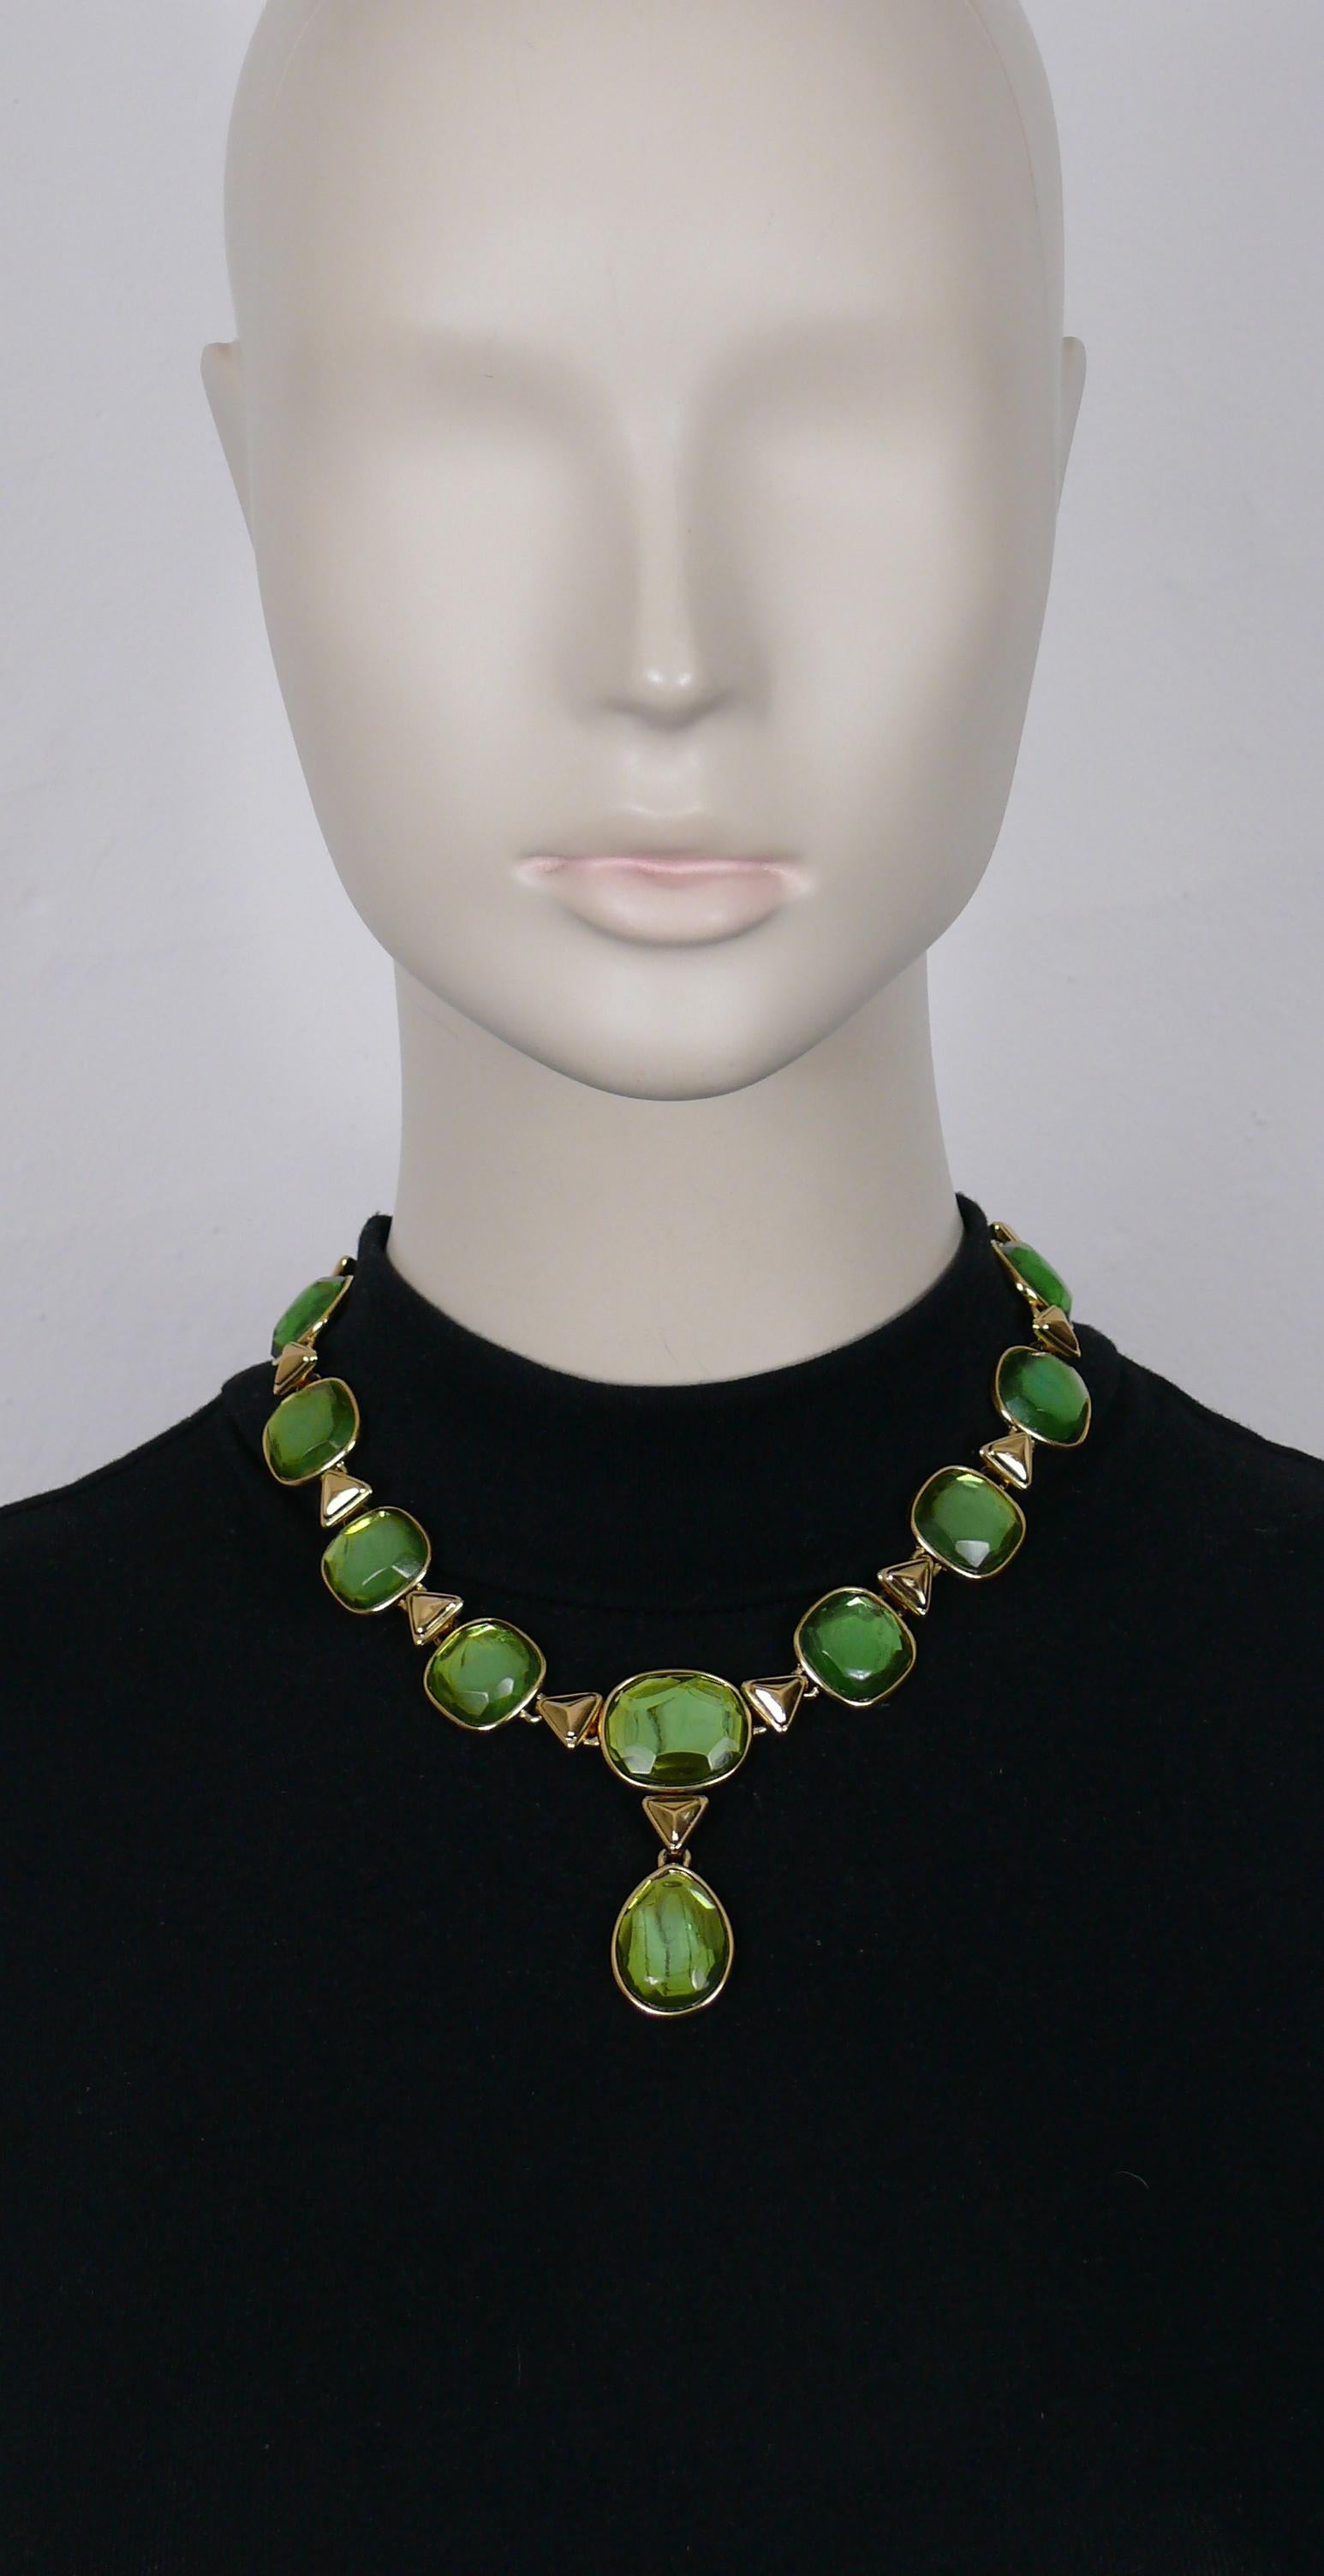 YVES SAINT LAURENT vintage gold tone necklace featuring green resin cabochons.

Spring clasp closure.
Adjustable length.

Embossed YSL Made in France.

Indicative measurements : adjustable length from approx. 40 cm (15.75 inches) to approx. 45 cm